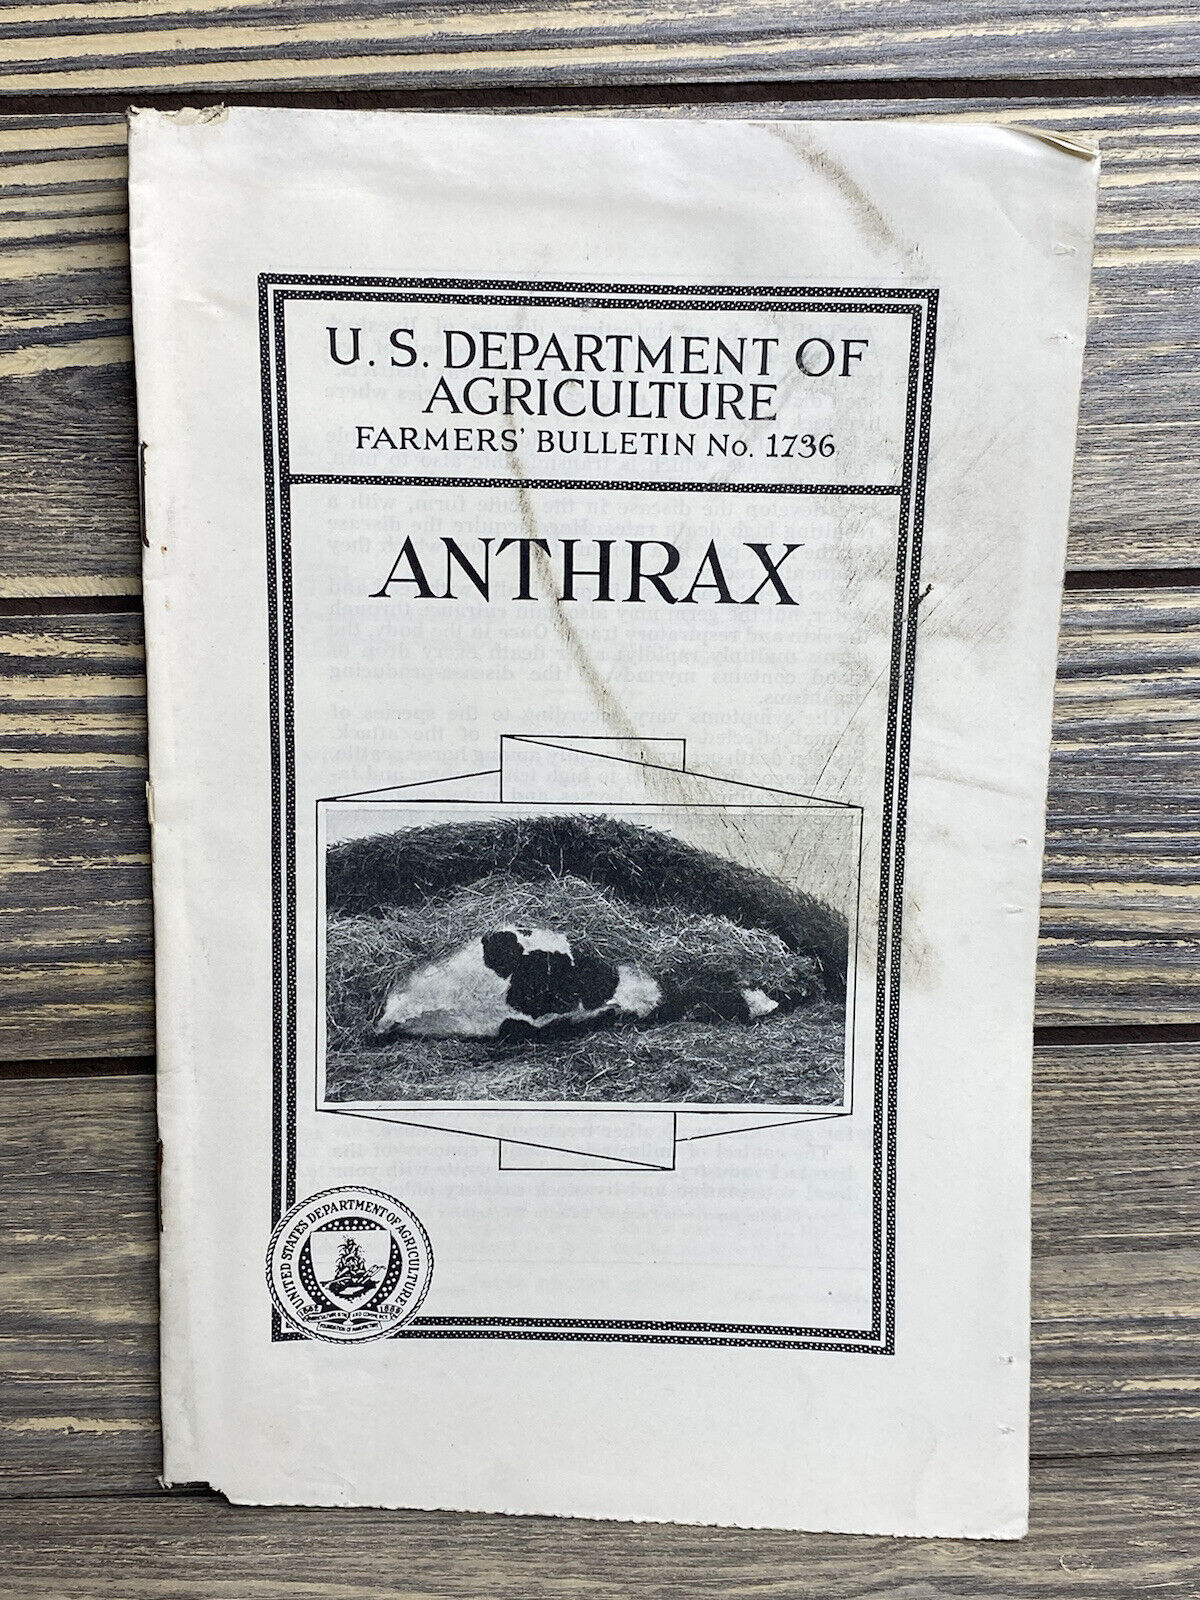 Vintage Farmers Bulletin US Dept of Agriculture No 1736 Anthrax 1934